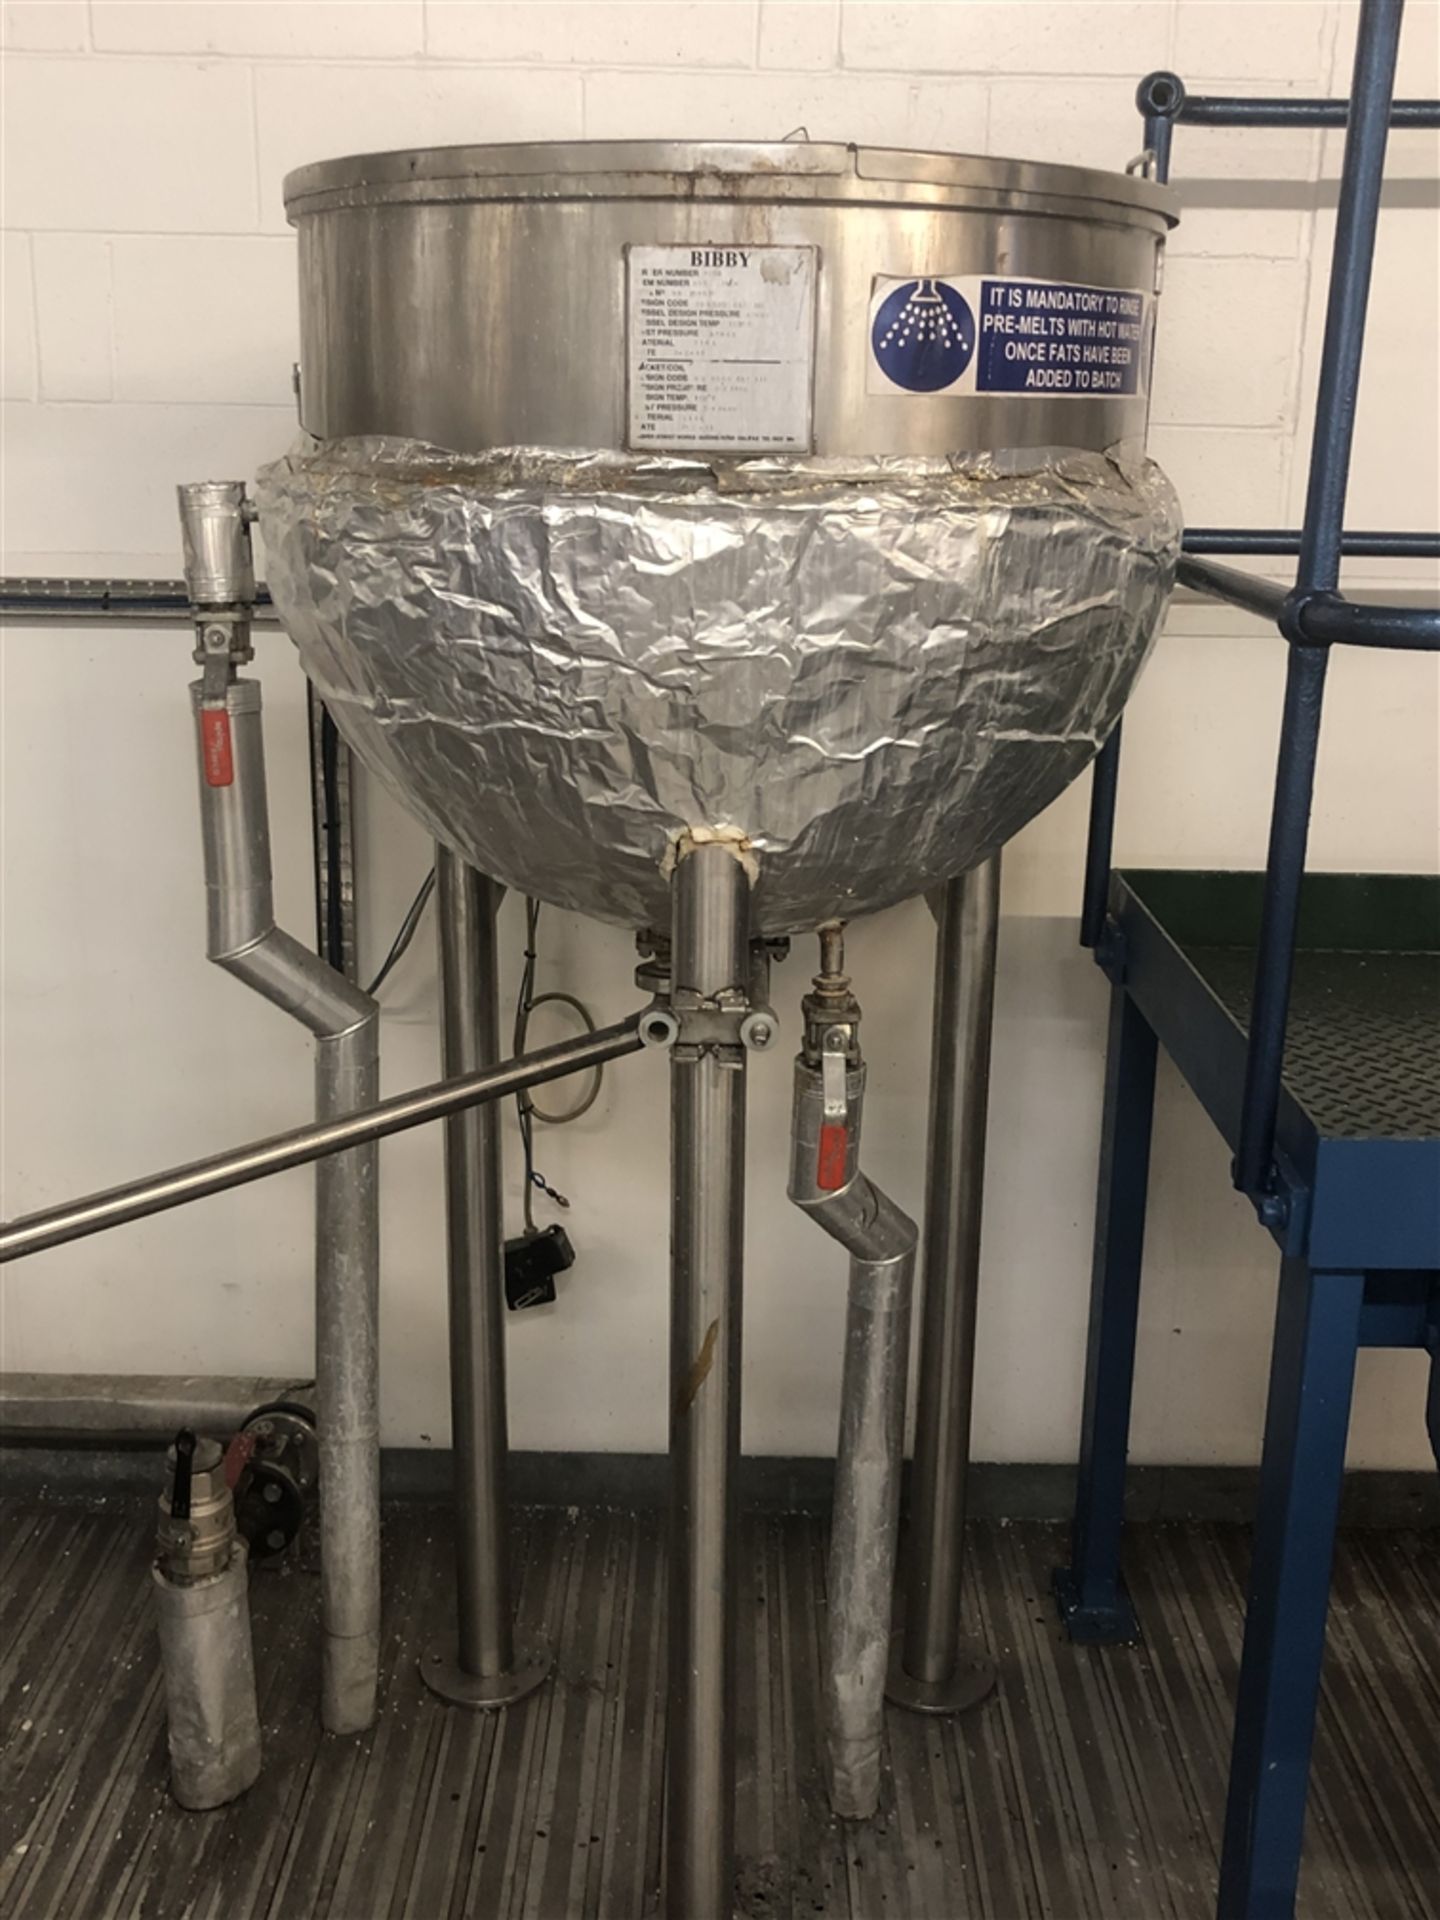 Bibby’s 300 Litre stainless steel jacketed hemisph